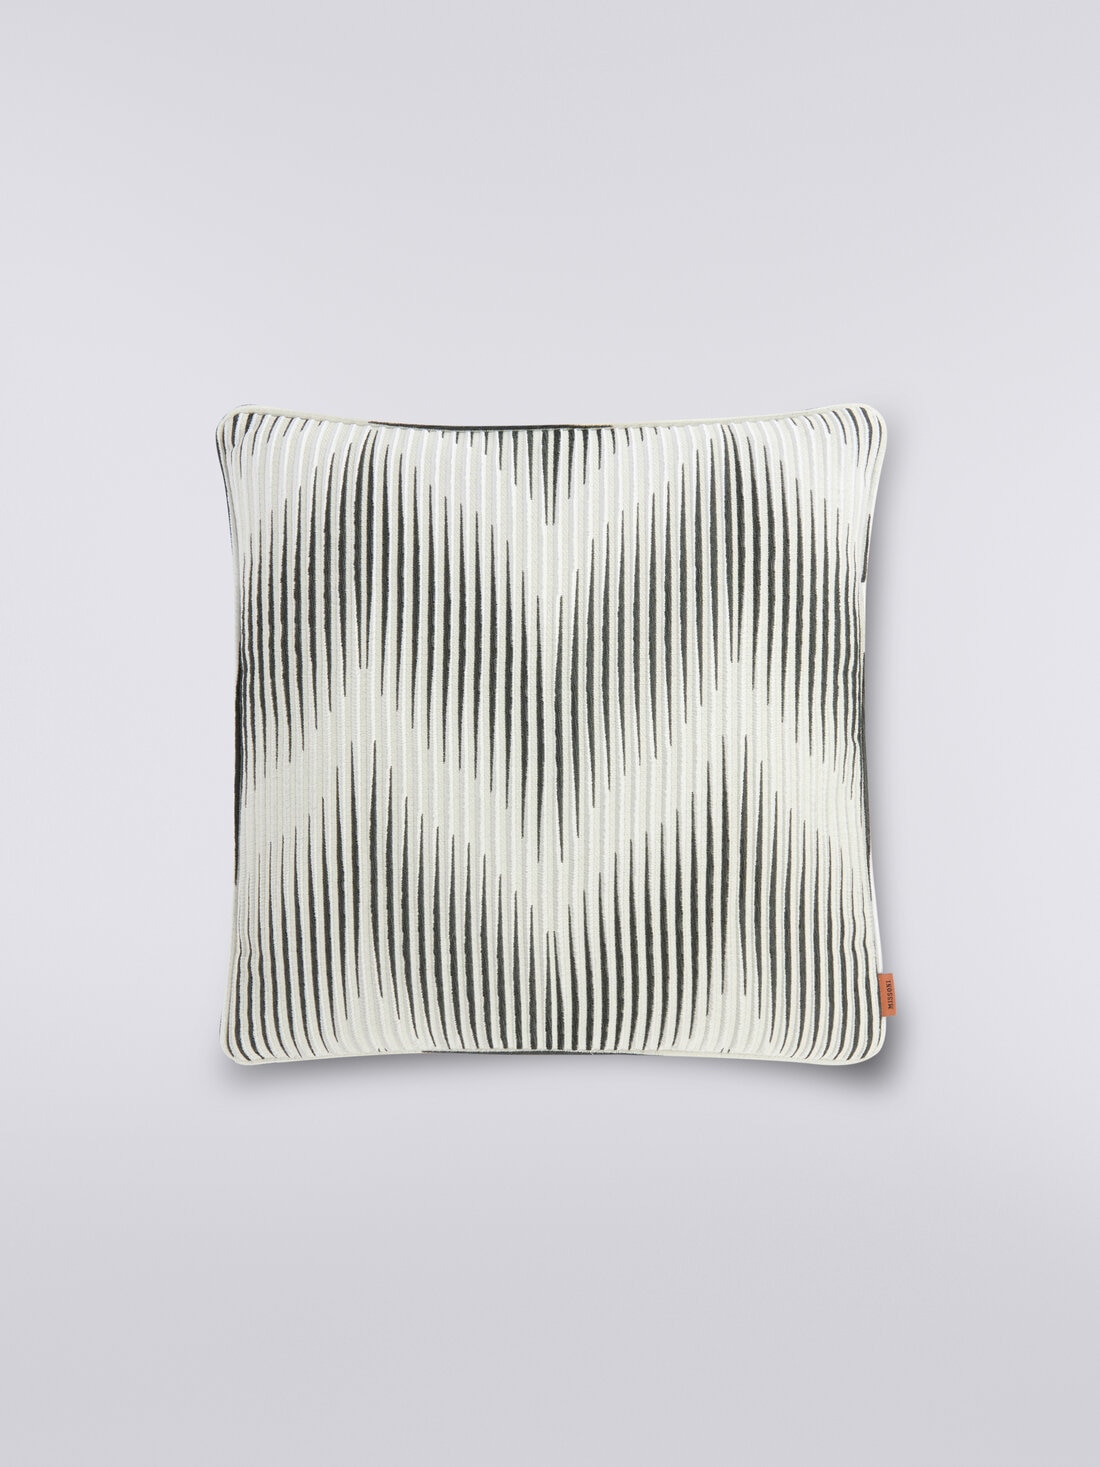 Ande 40x40 cm cushion with faded chevron, Black & White - 8051575829567 - 0